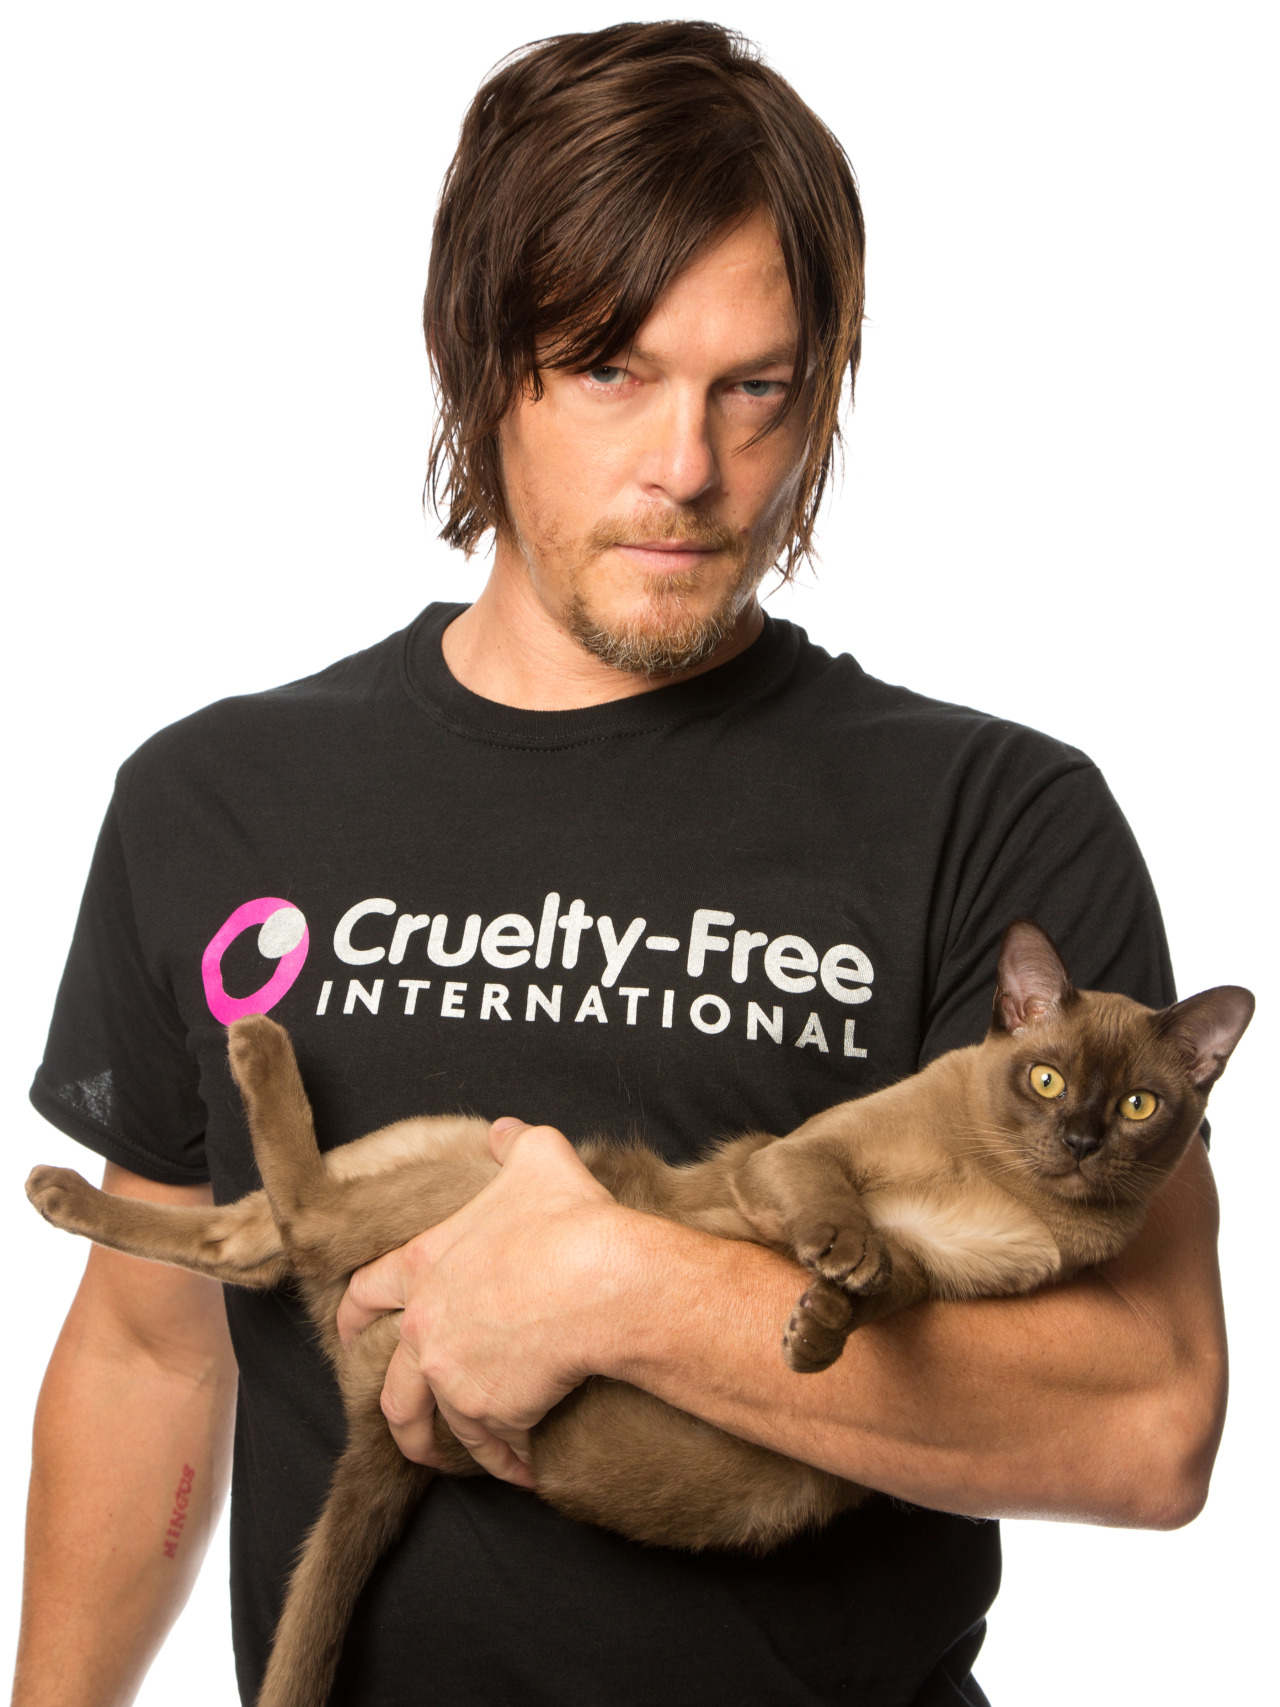 Daryl Dixon loves cats.
IT’S A SIGN. CATS WILL INHERIT THE EARTH.